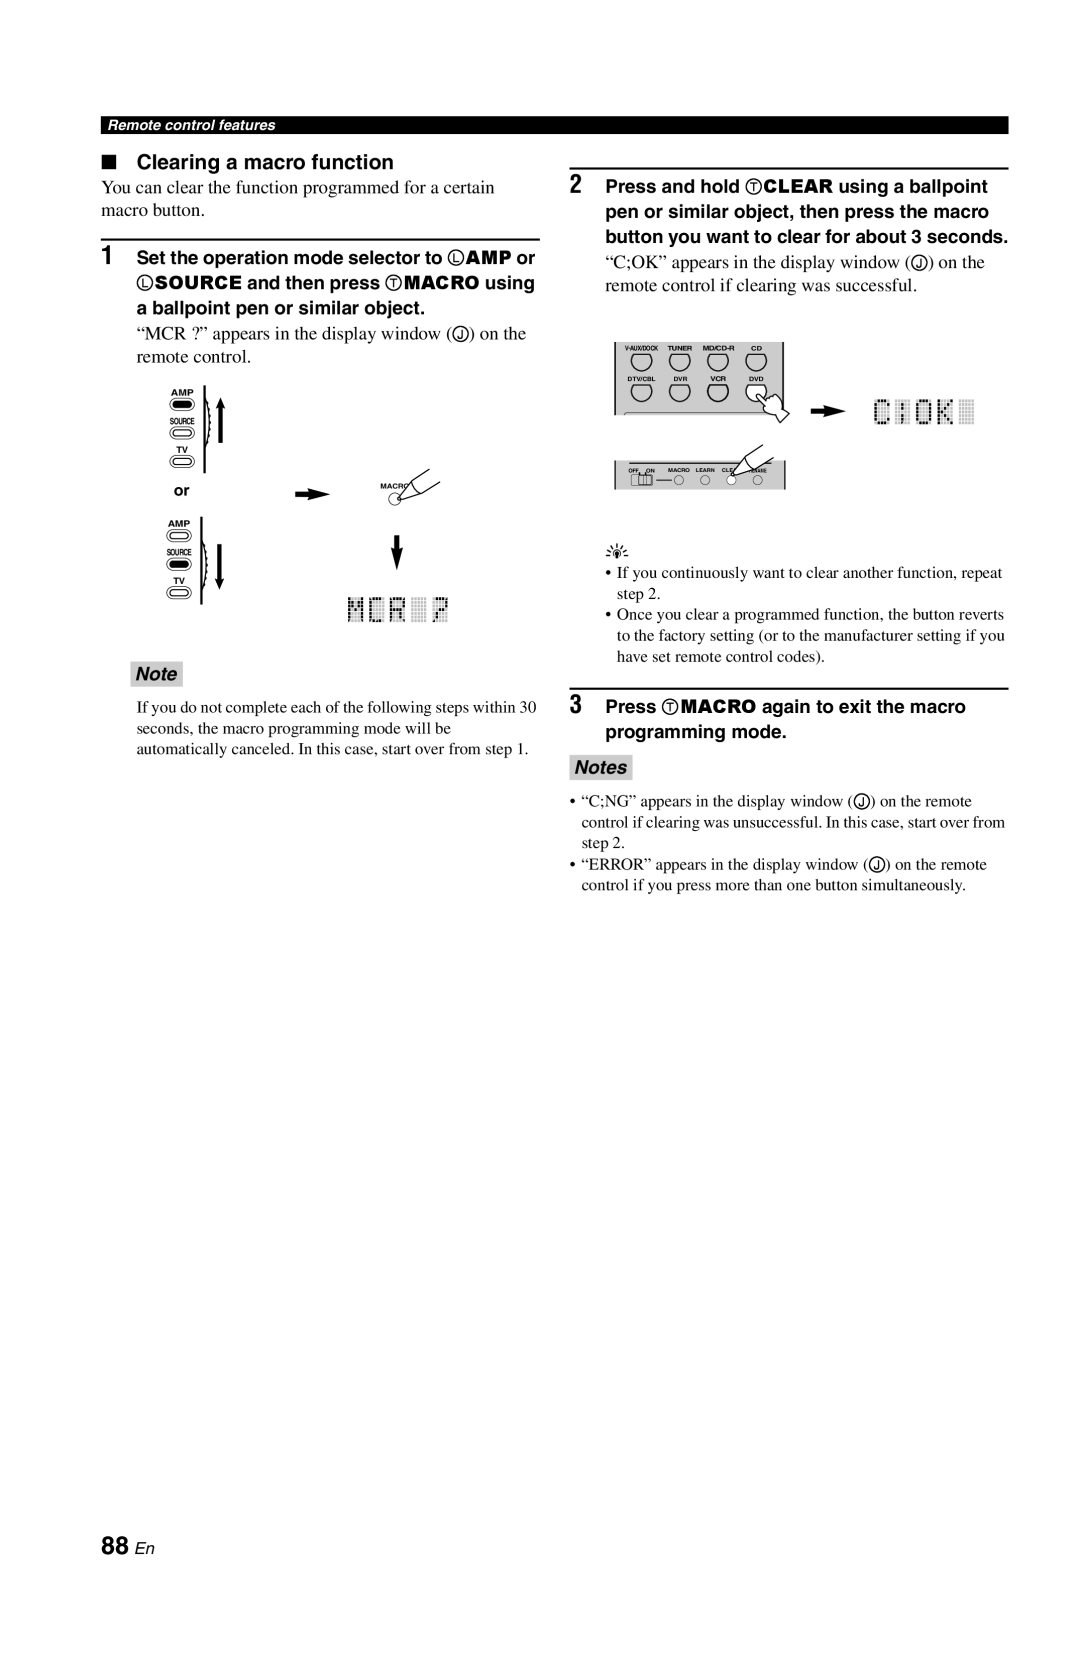 Yamaha DSP-AX861SE owner manual 88 En, Clearing a macro function, a ballpoint pen or similar object, Notes 